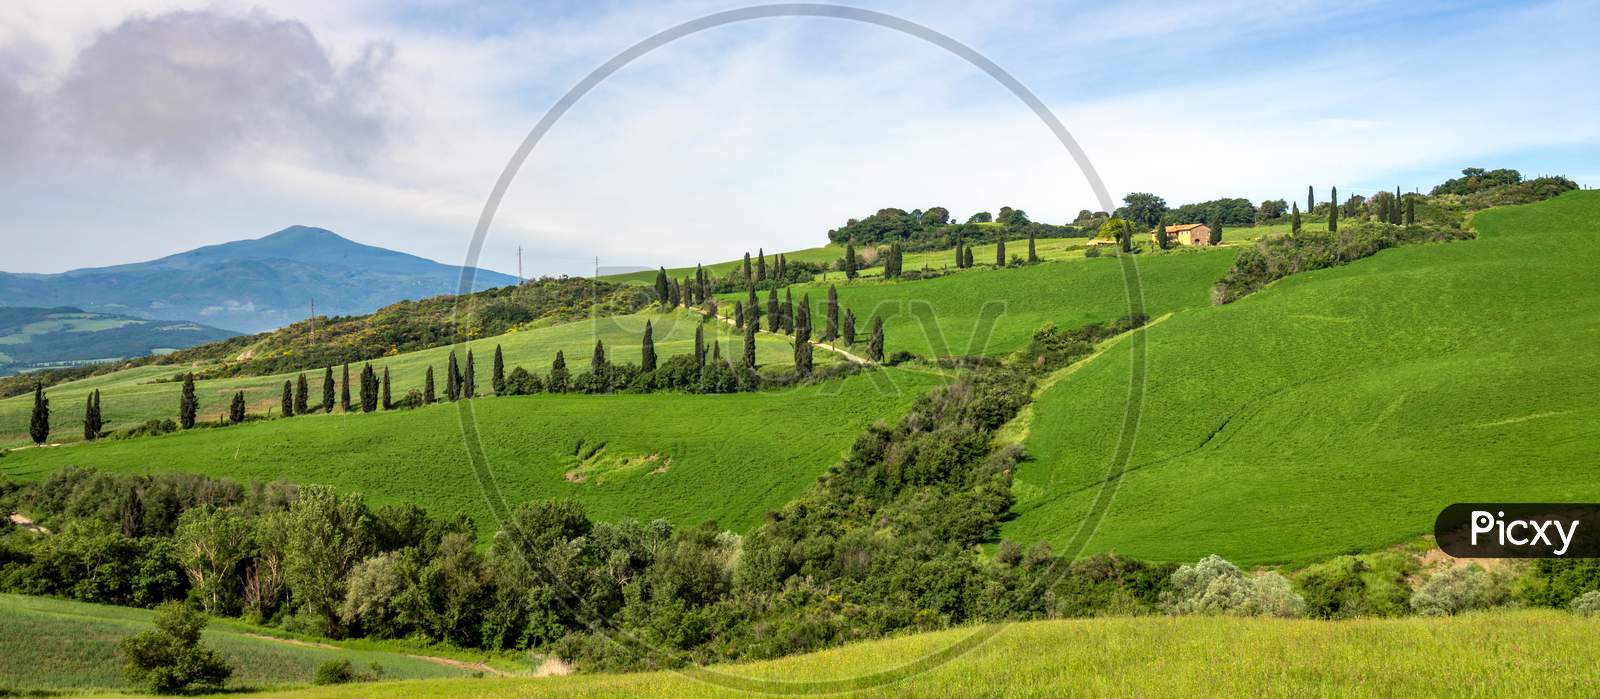 Val D'Orcia, Tuscany/Italy - May 22 : Scenery Of Val D'Orcia In Tuscany On May 22, 2013